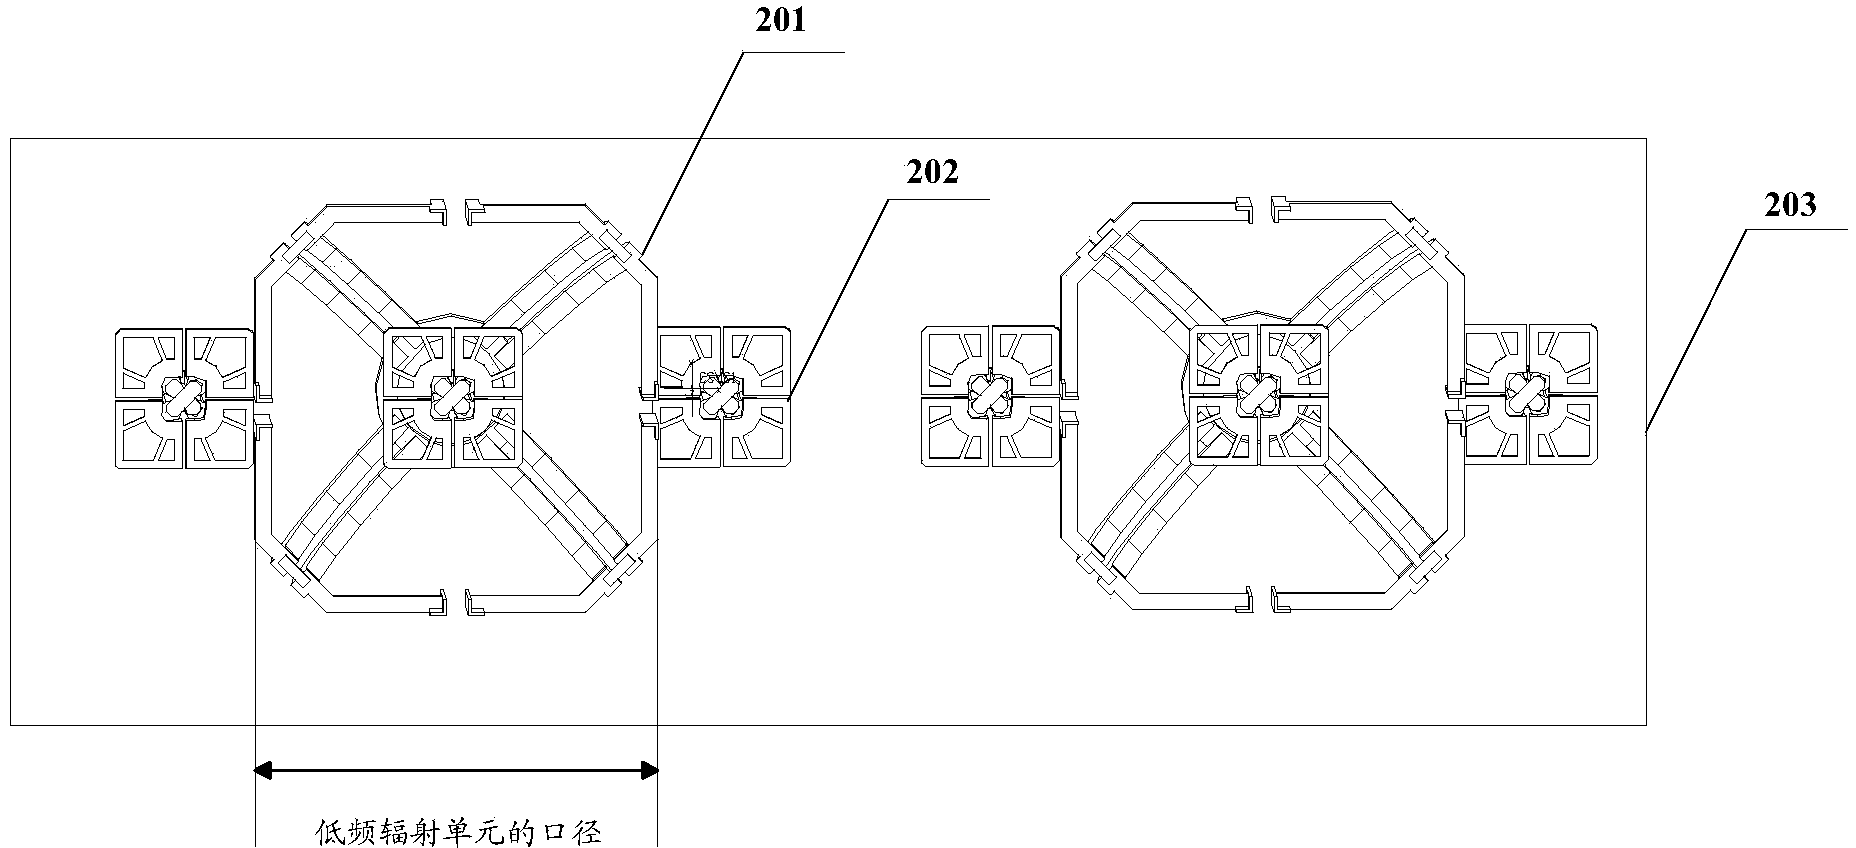 Low-frequency radiation unit and double-frequency antenna